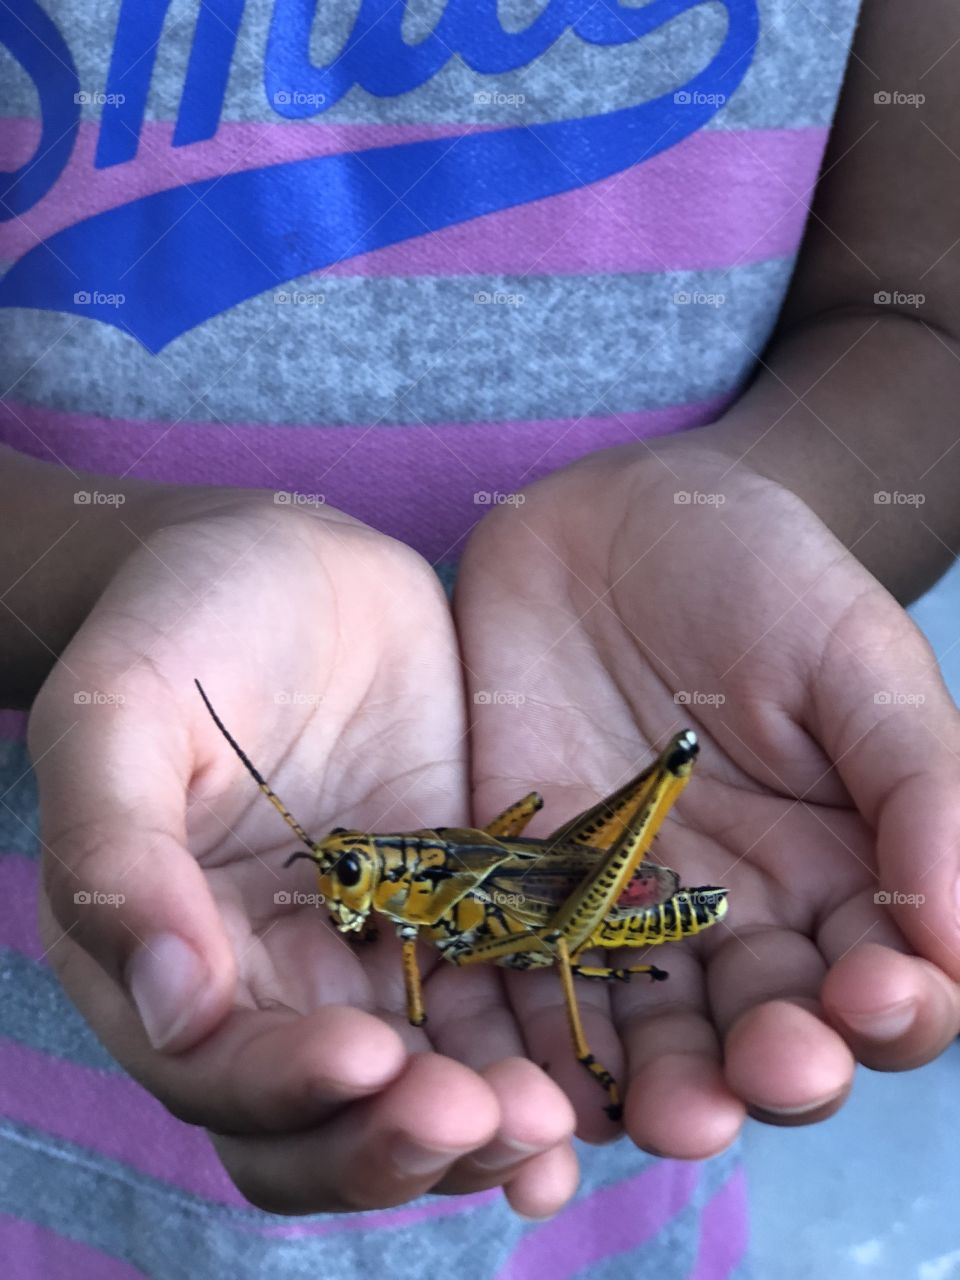 Locust hanging out